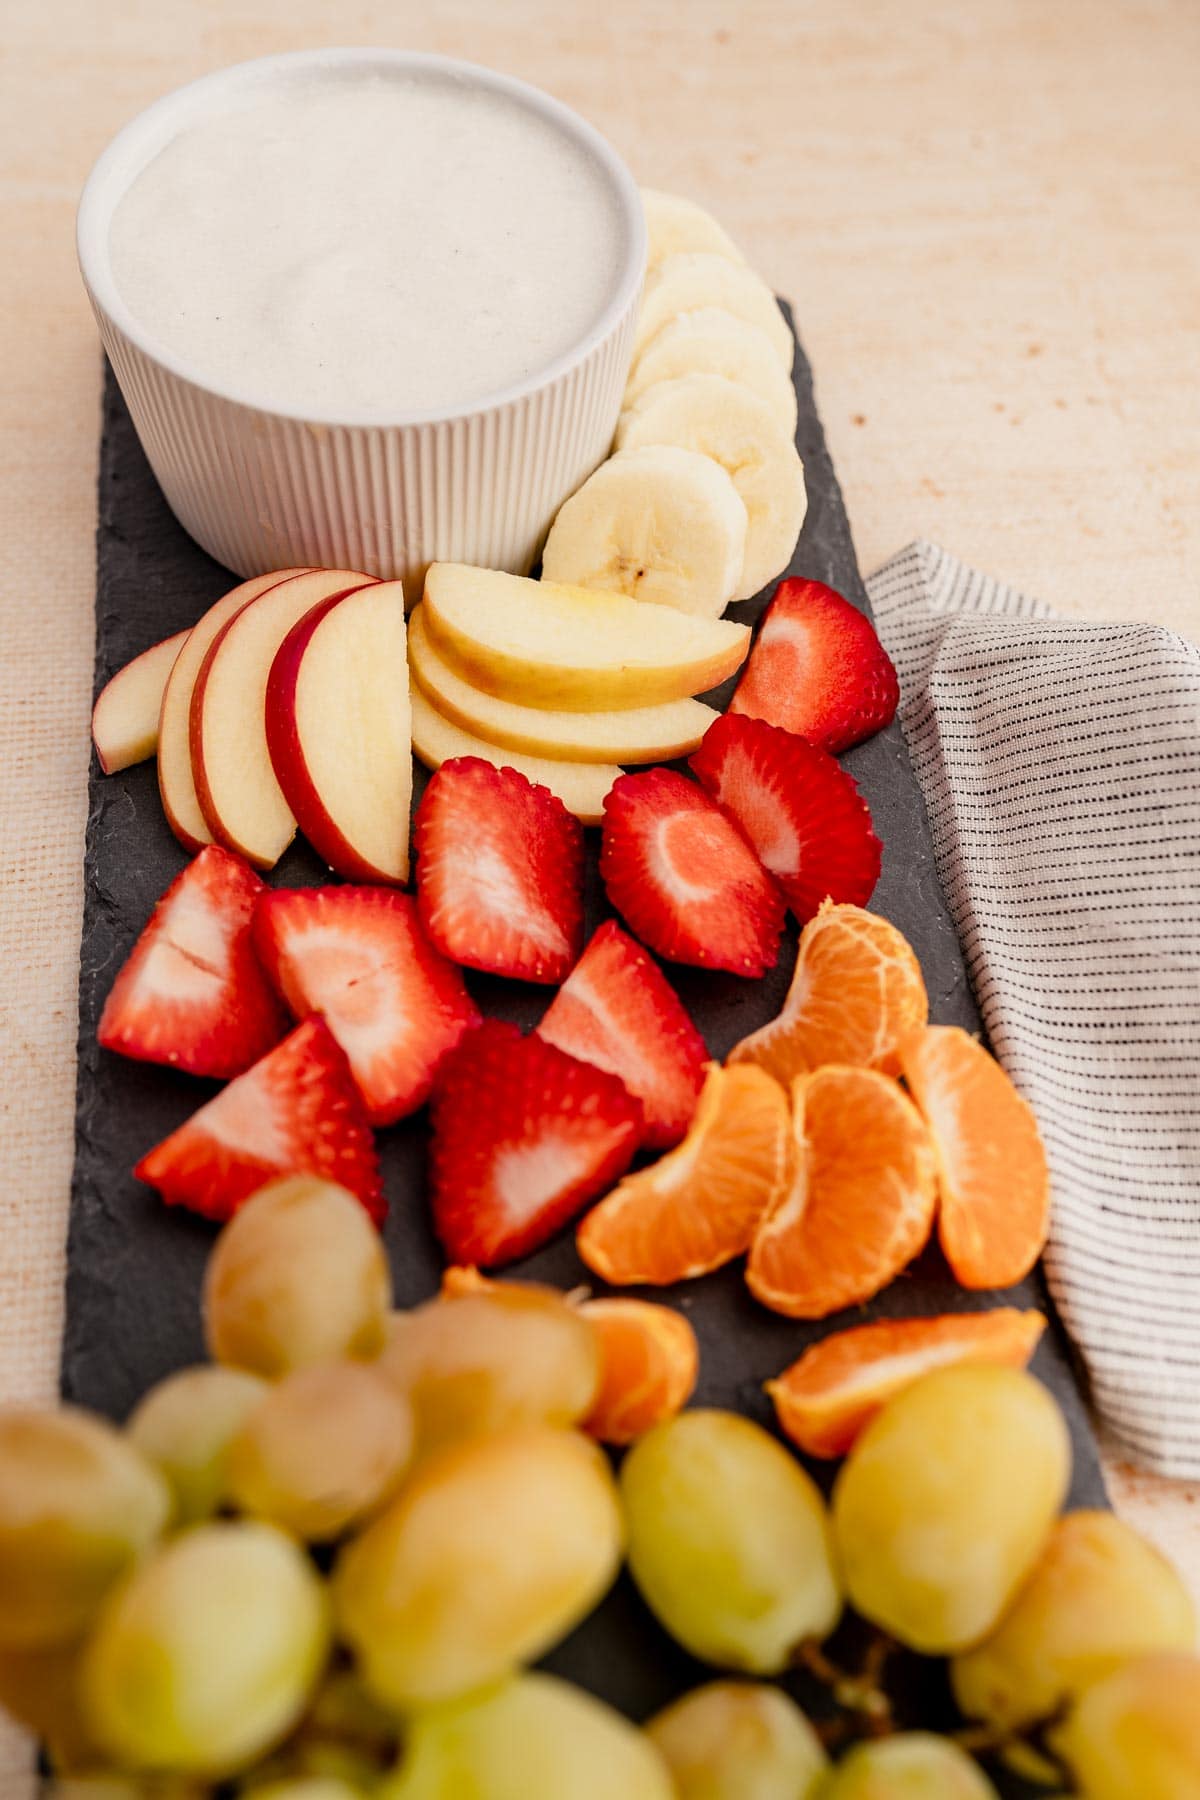 A platter with fruit, grapes, and a fruit dip.